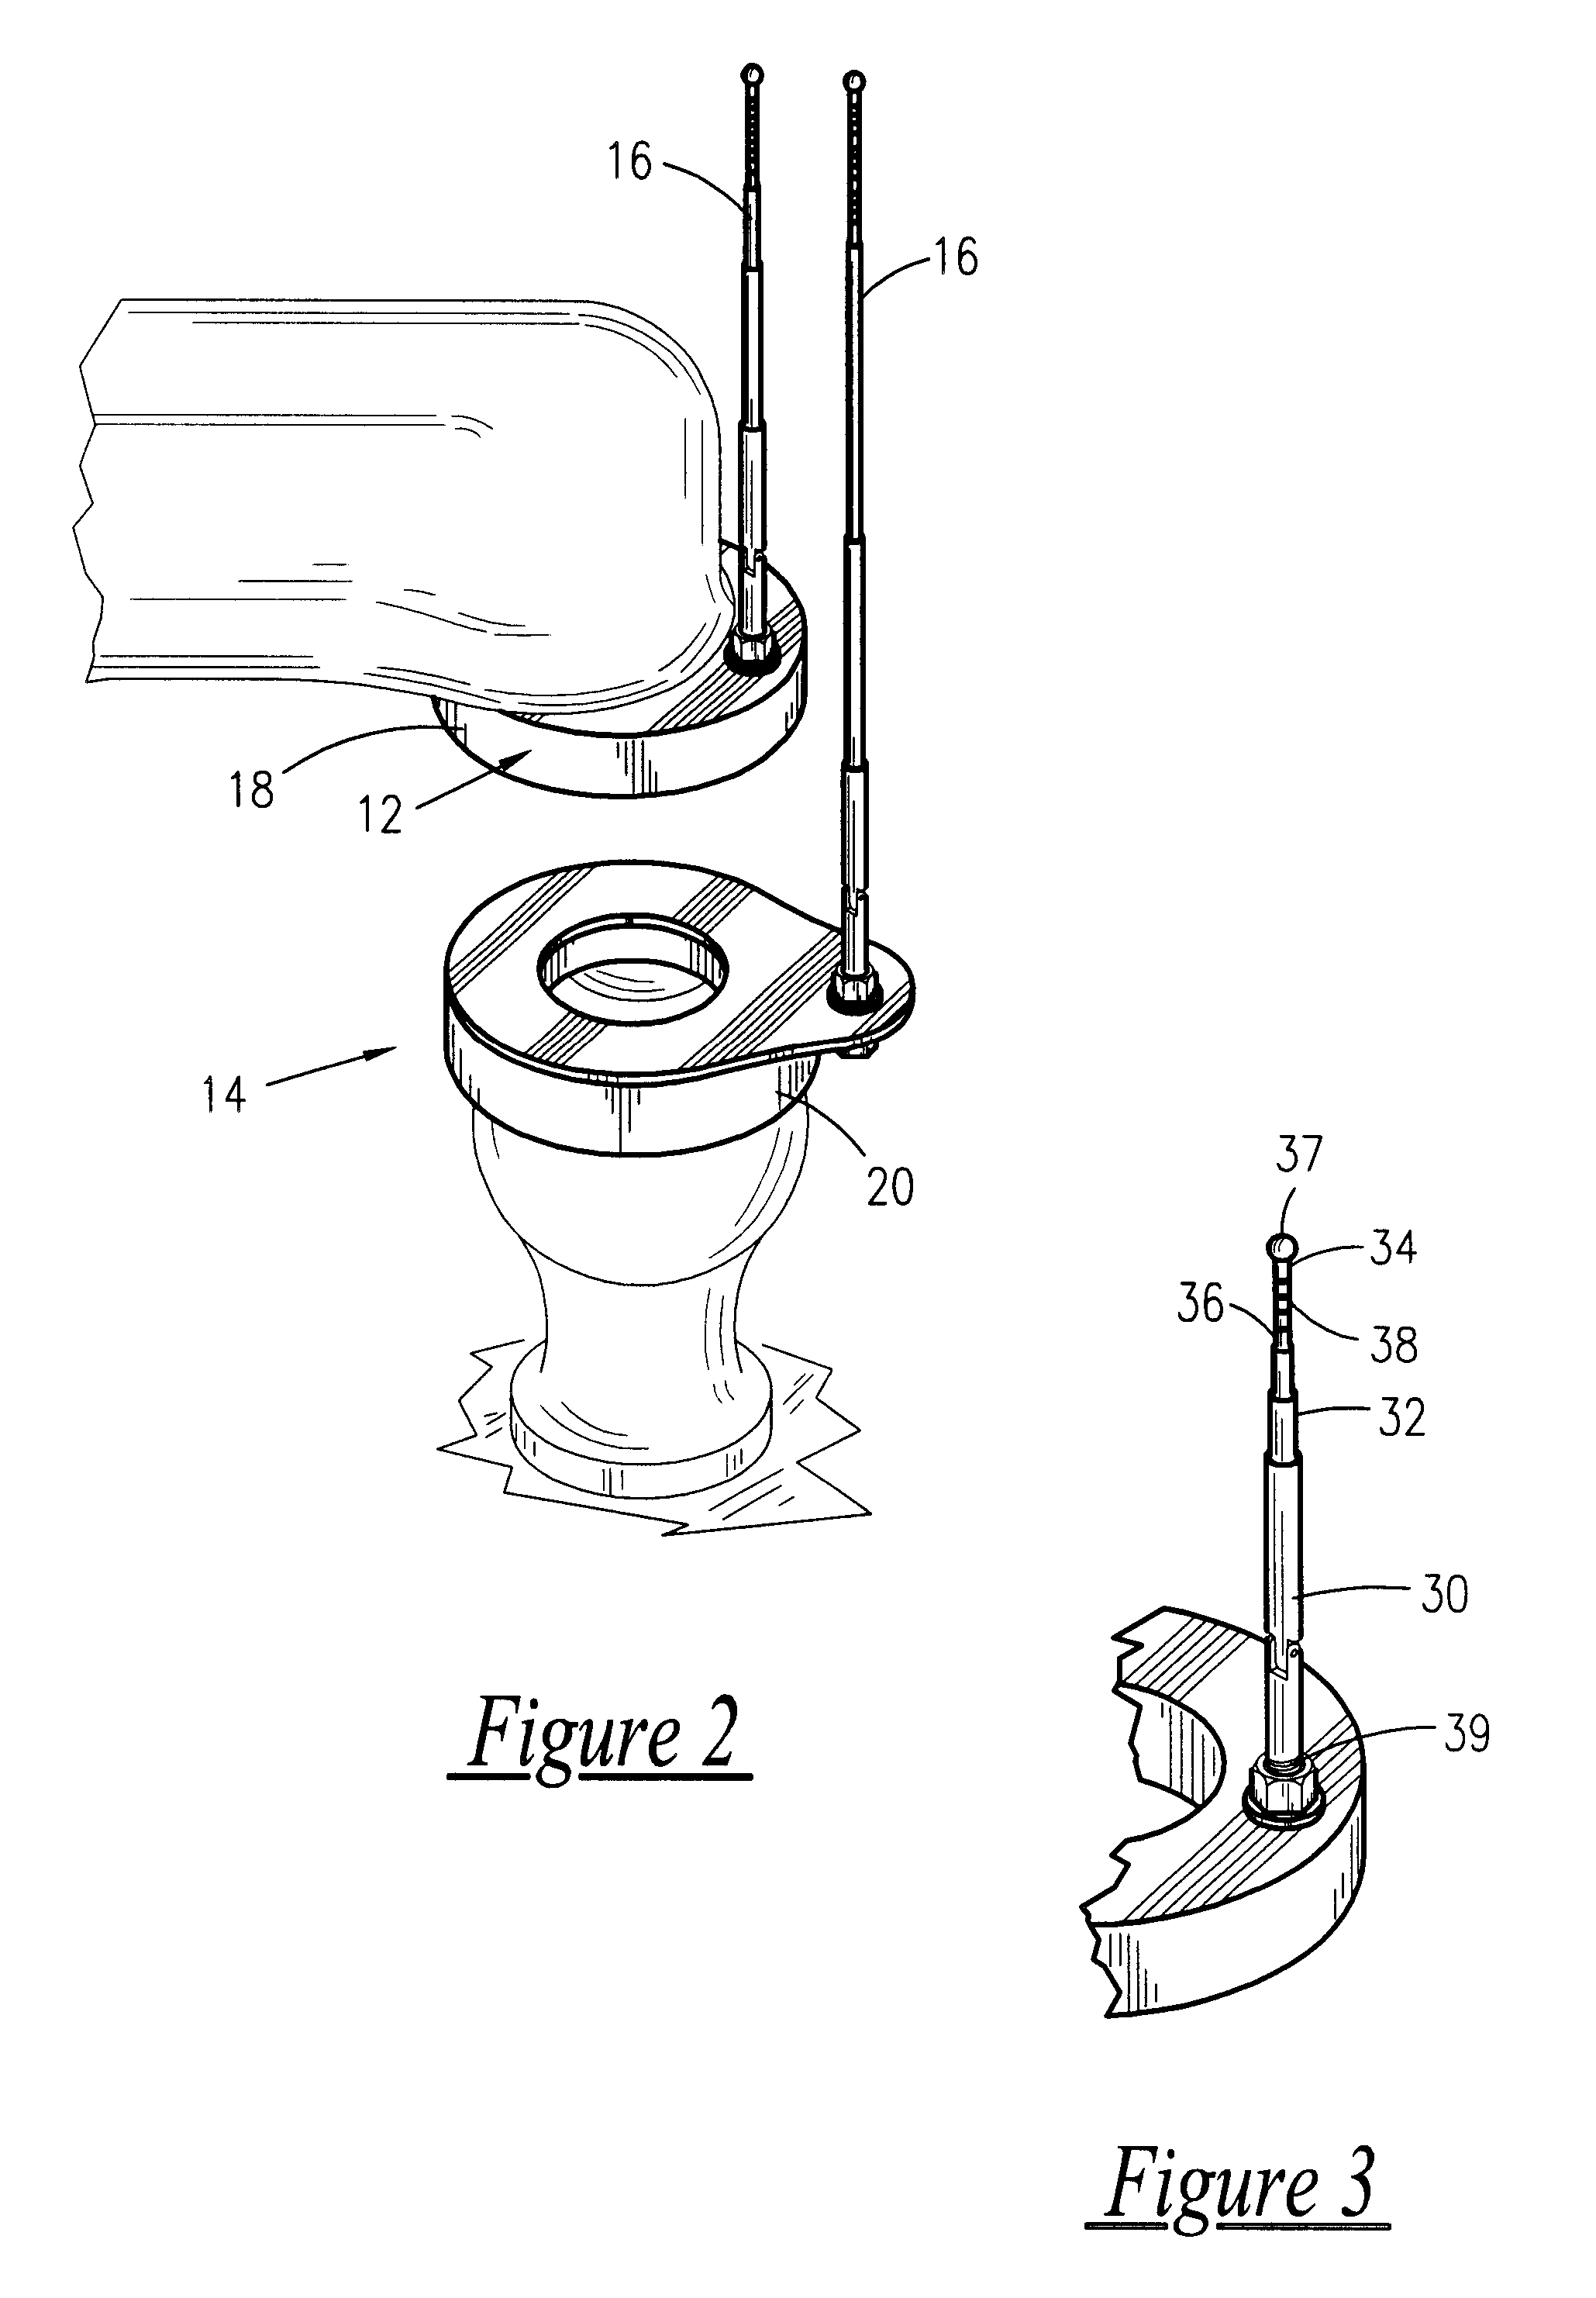 Magnetic, telescoping trailer hitch alignment device